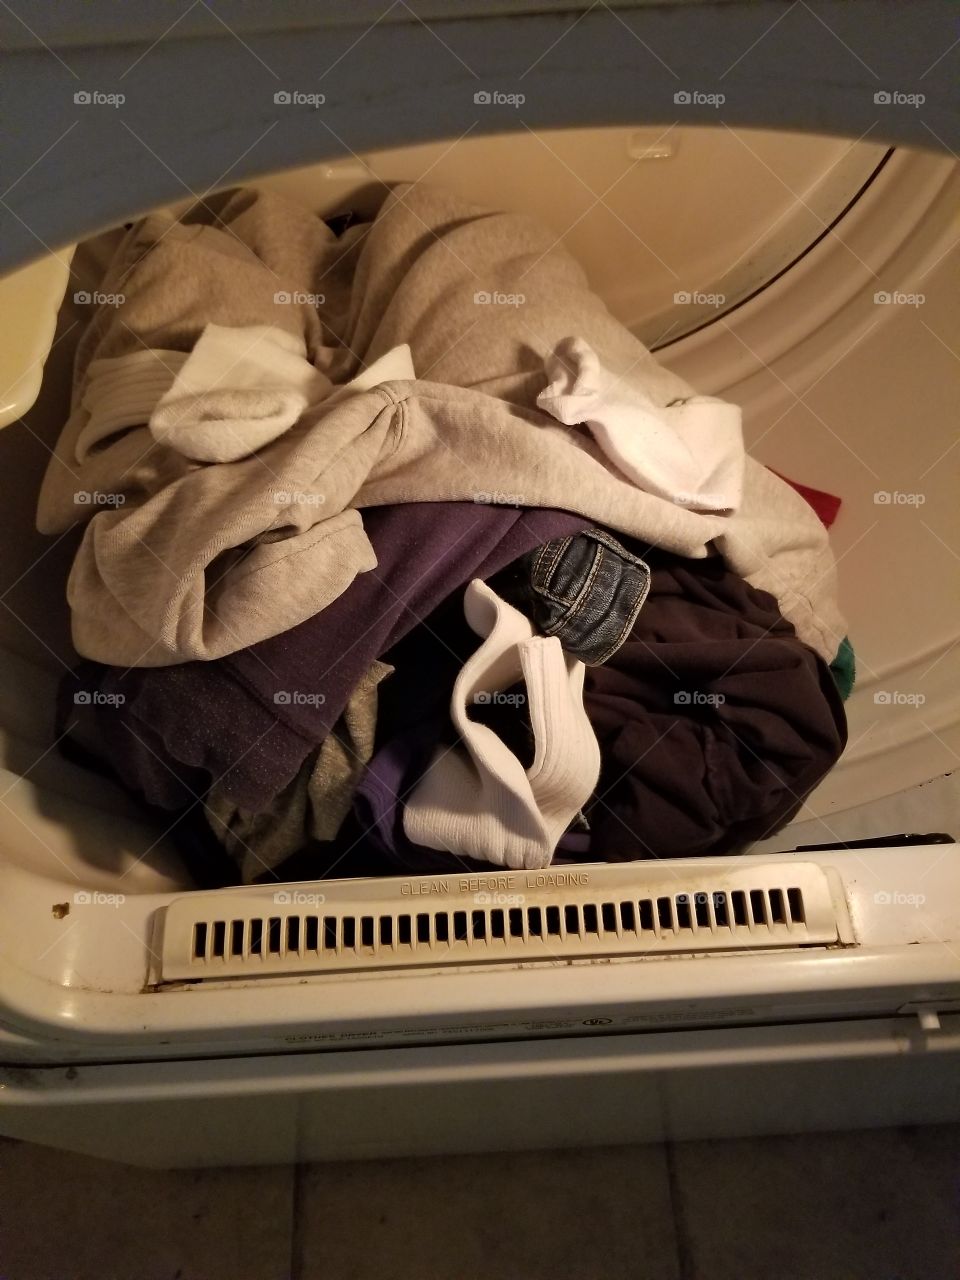 clothes in dryer